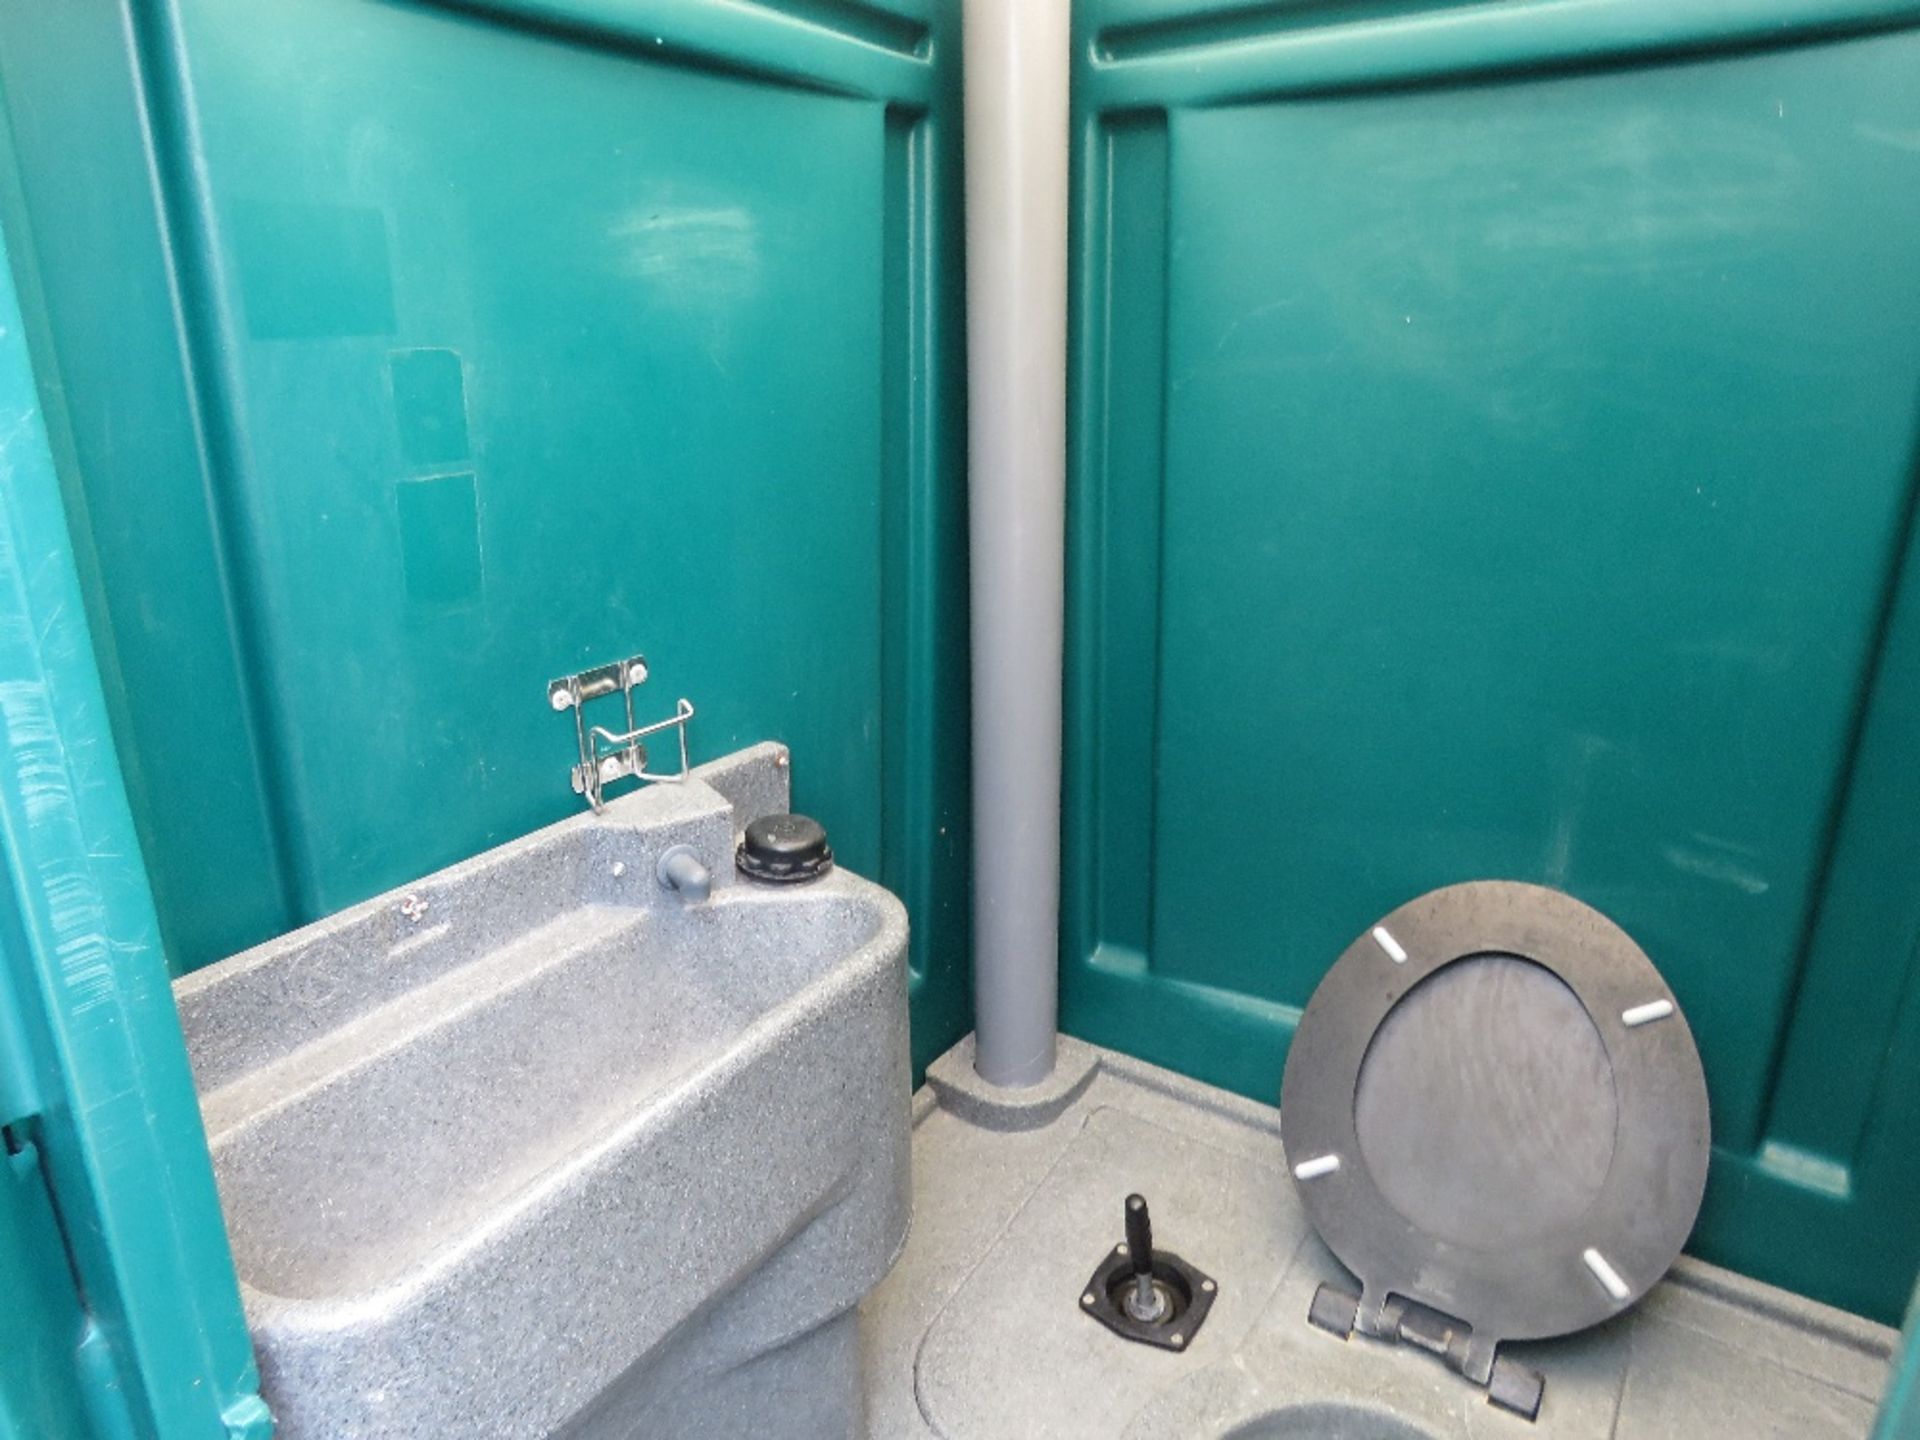 PORTABLE SITE / EVENTS TOILET, DIRECT FROM EVENTS COMPANY DUE TO ONGOING REPLACEMENT PRGRAMME. - Image 2 of 3